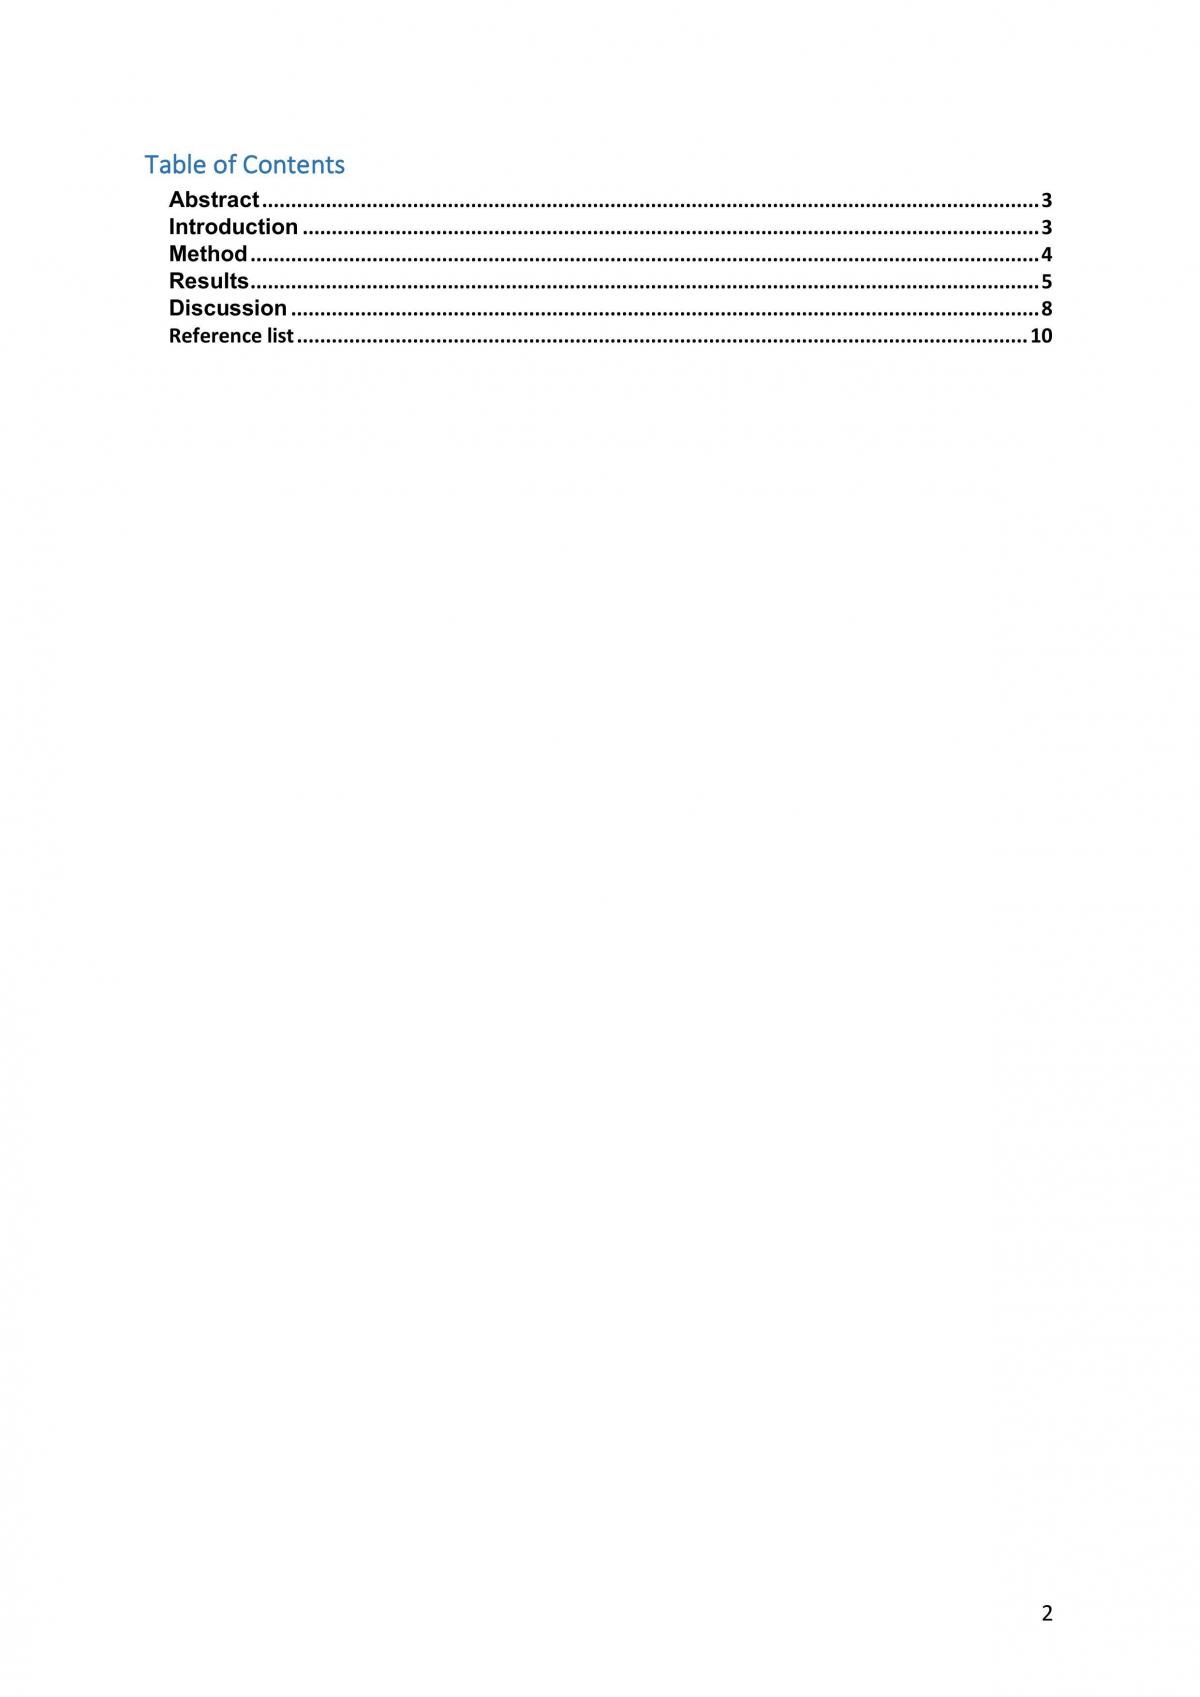 Lab Report 1: Measures of Respiratory Function - Page 2